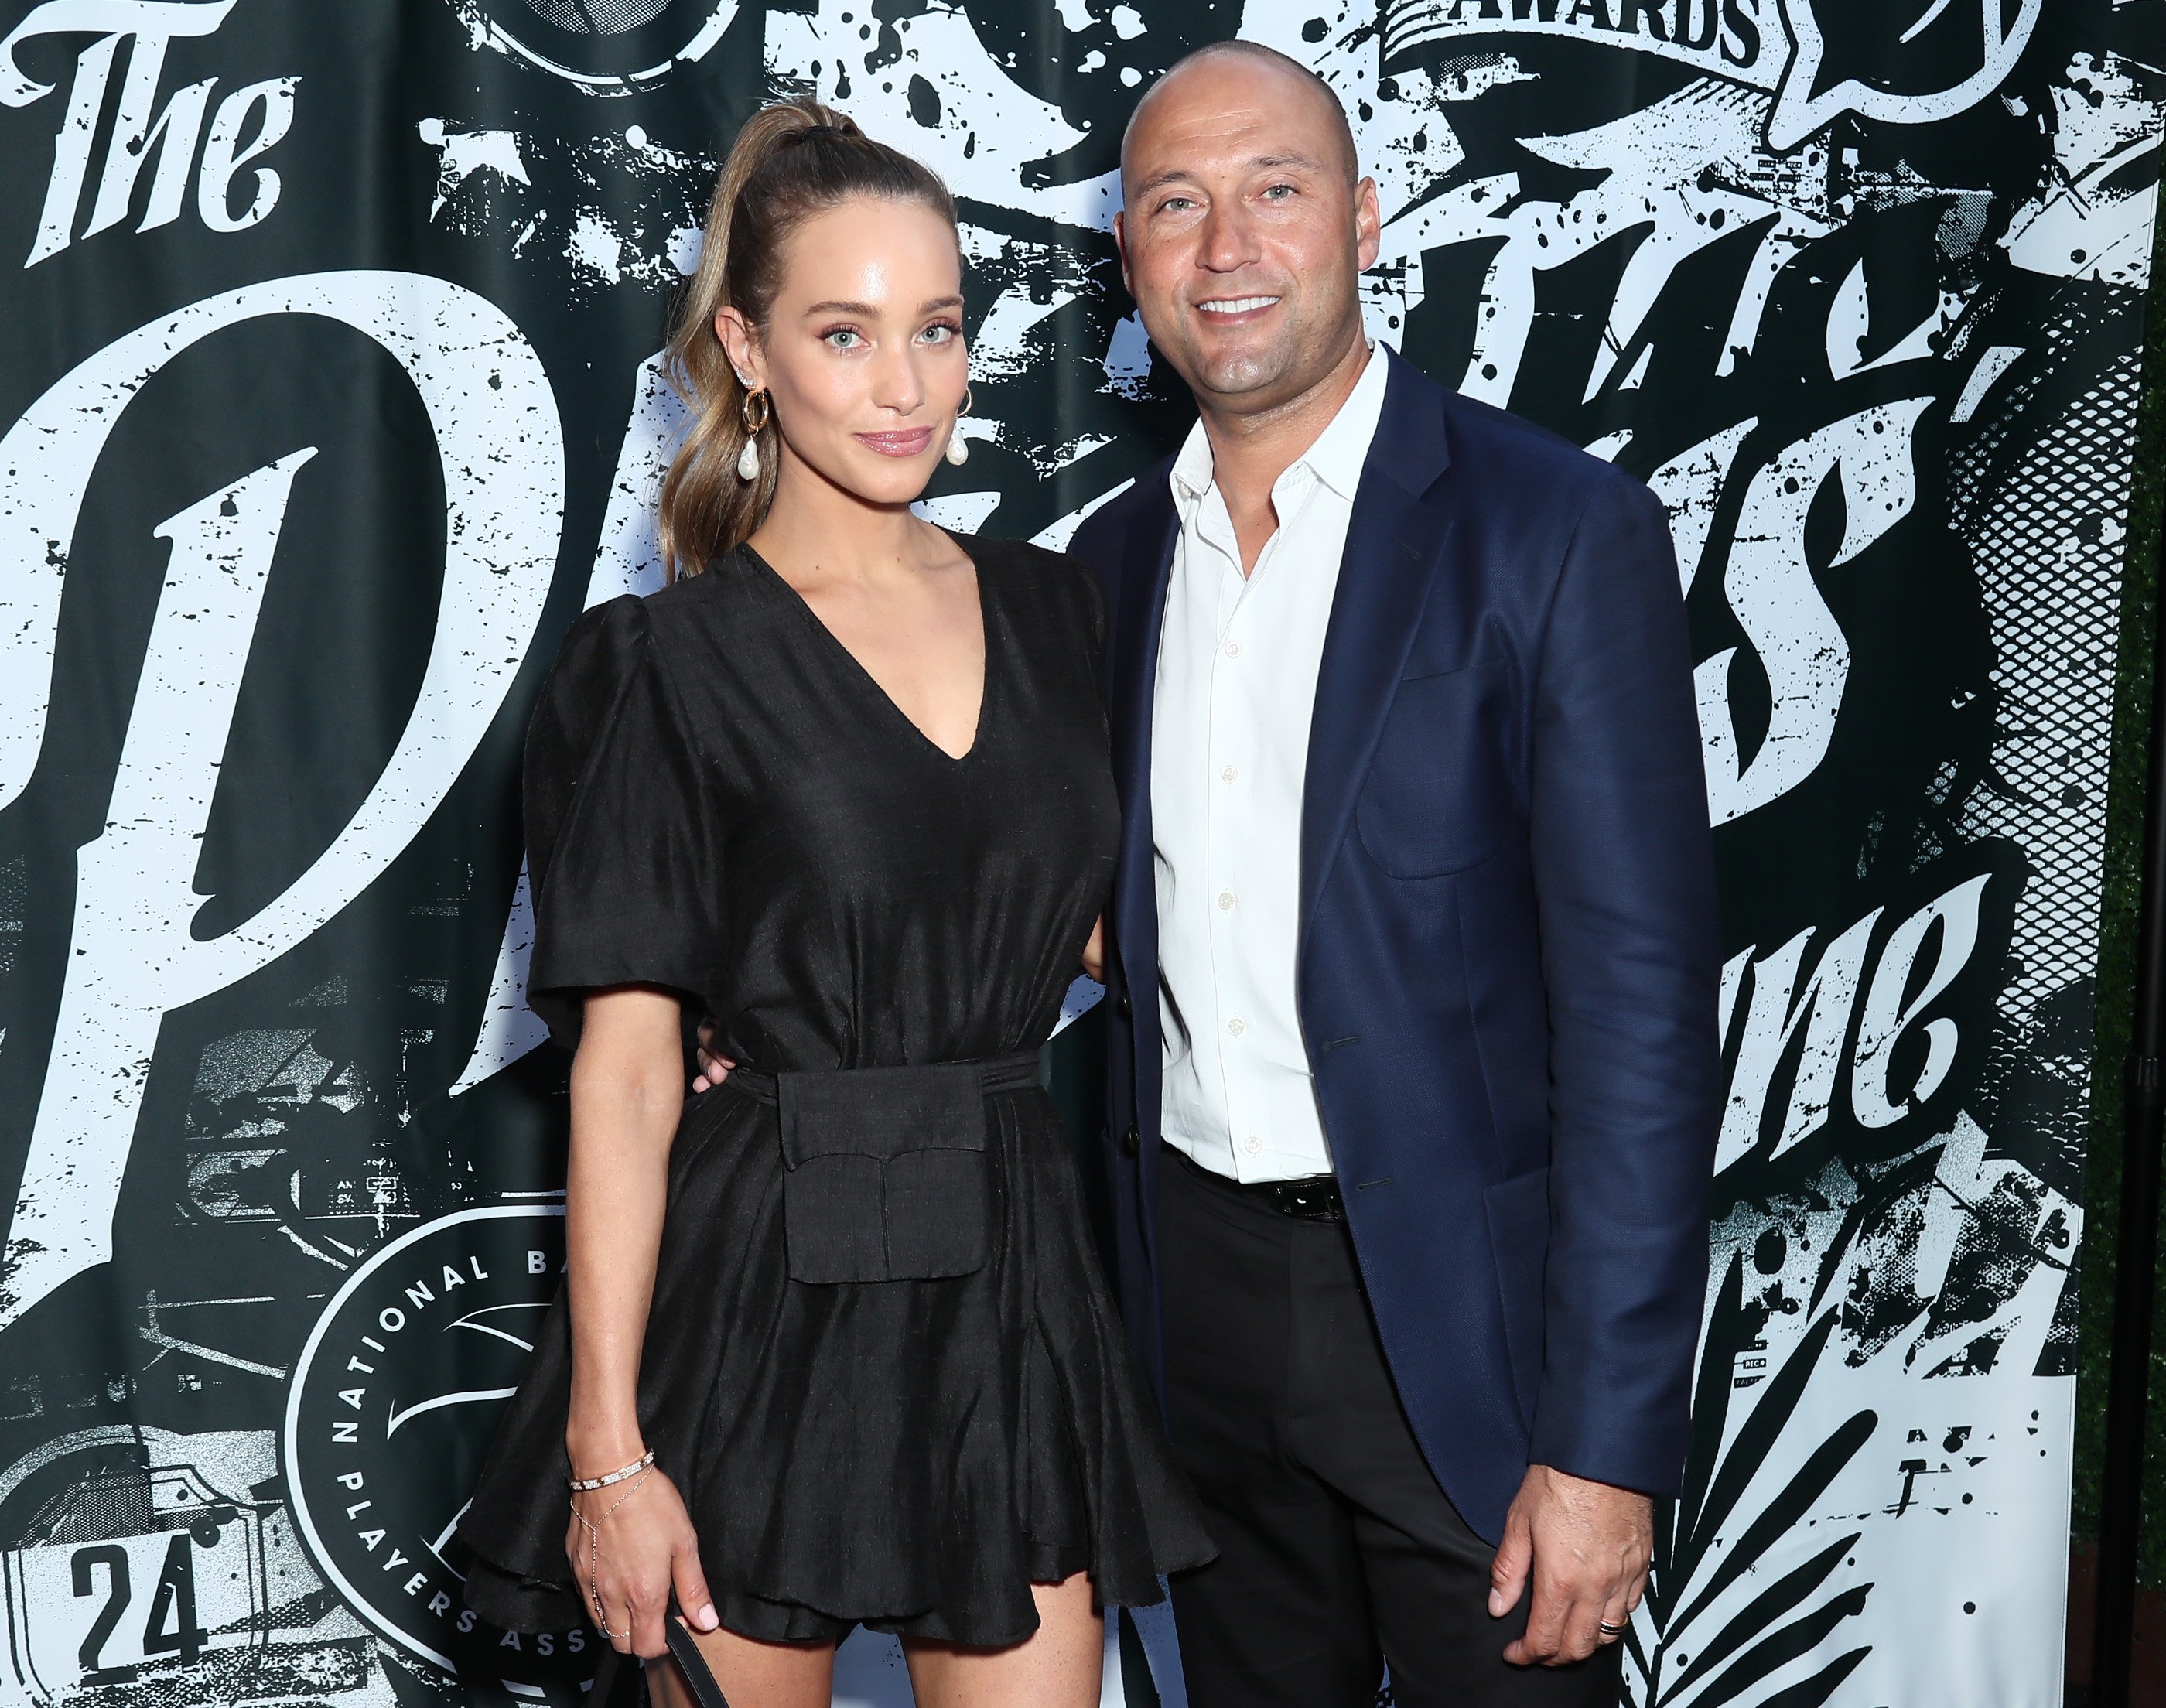 Derek Jeter and Hannah Jeter attend Players' Night Out hosted by The Players' Tribune